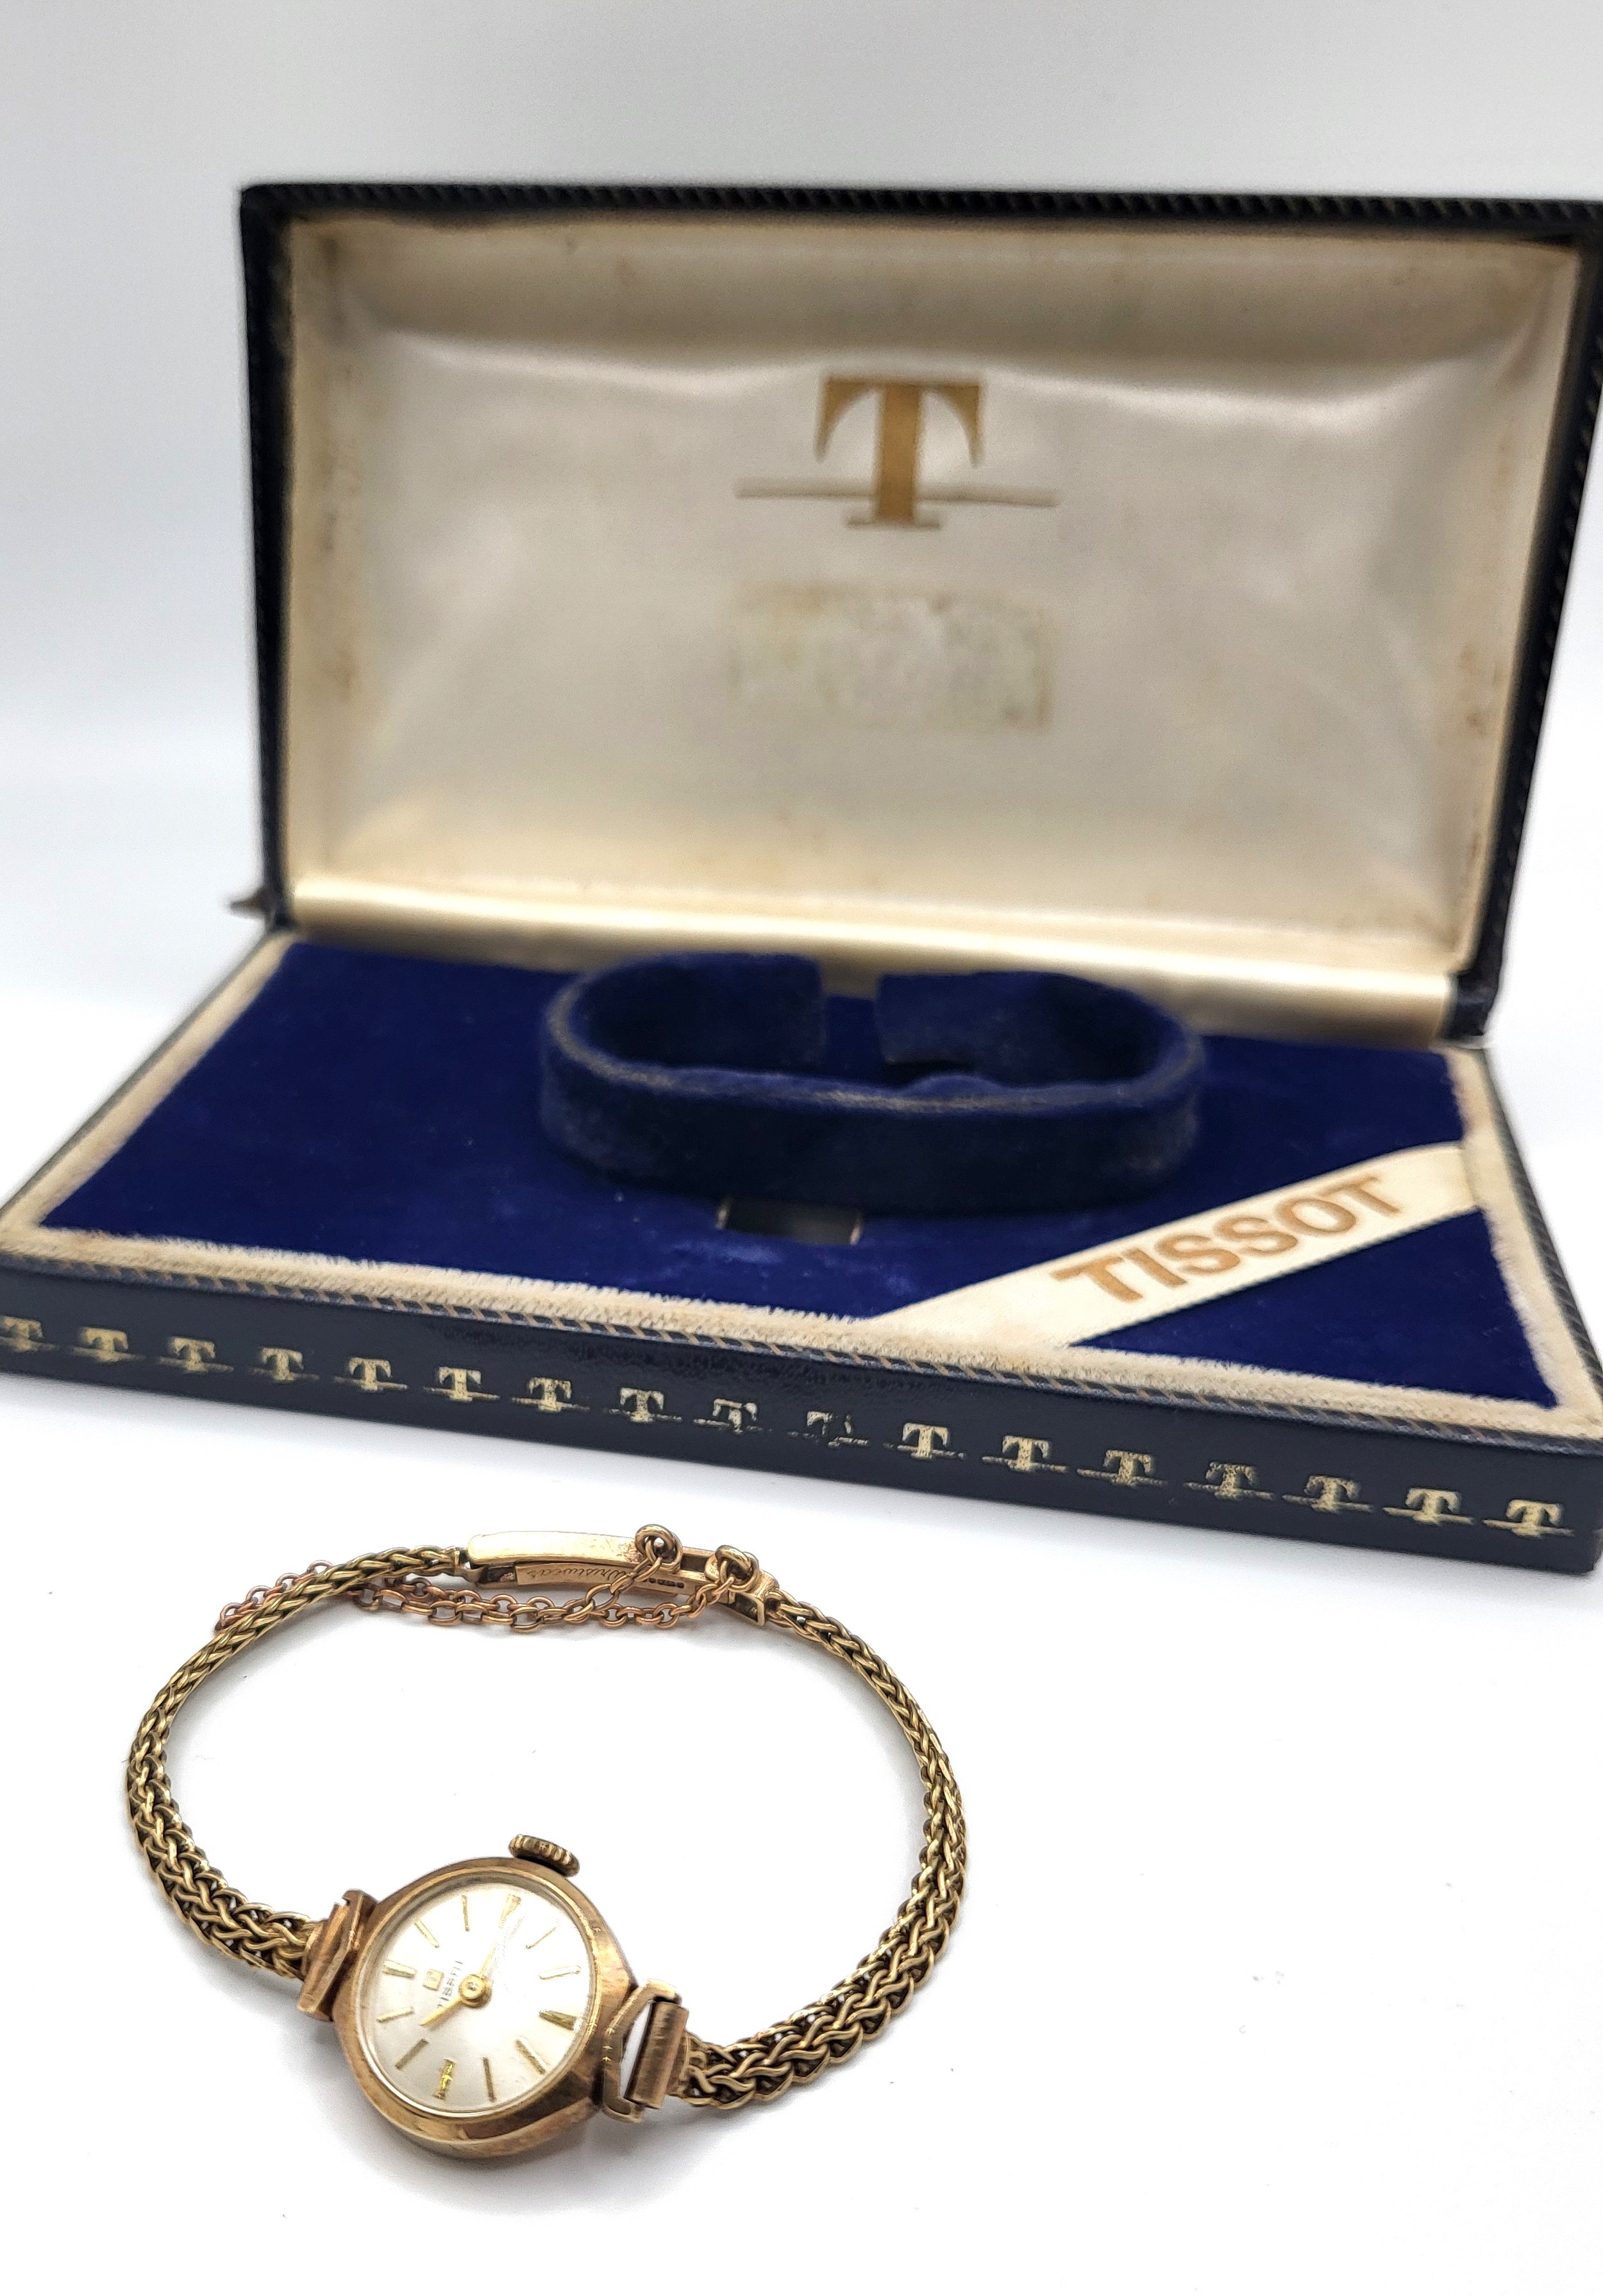 A Tissot 9ct gold ladies watch on an articulated bracelet and safety chain in the original